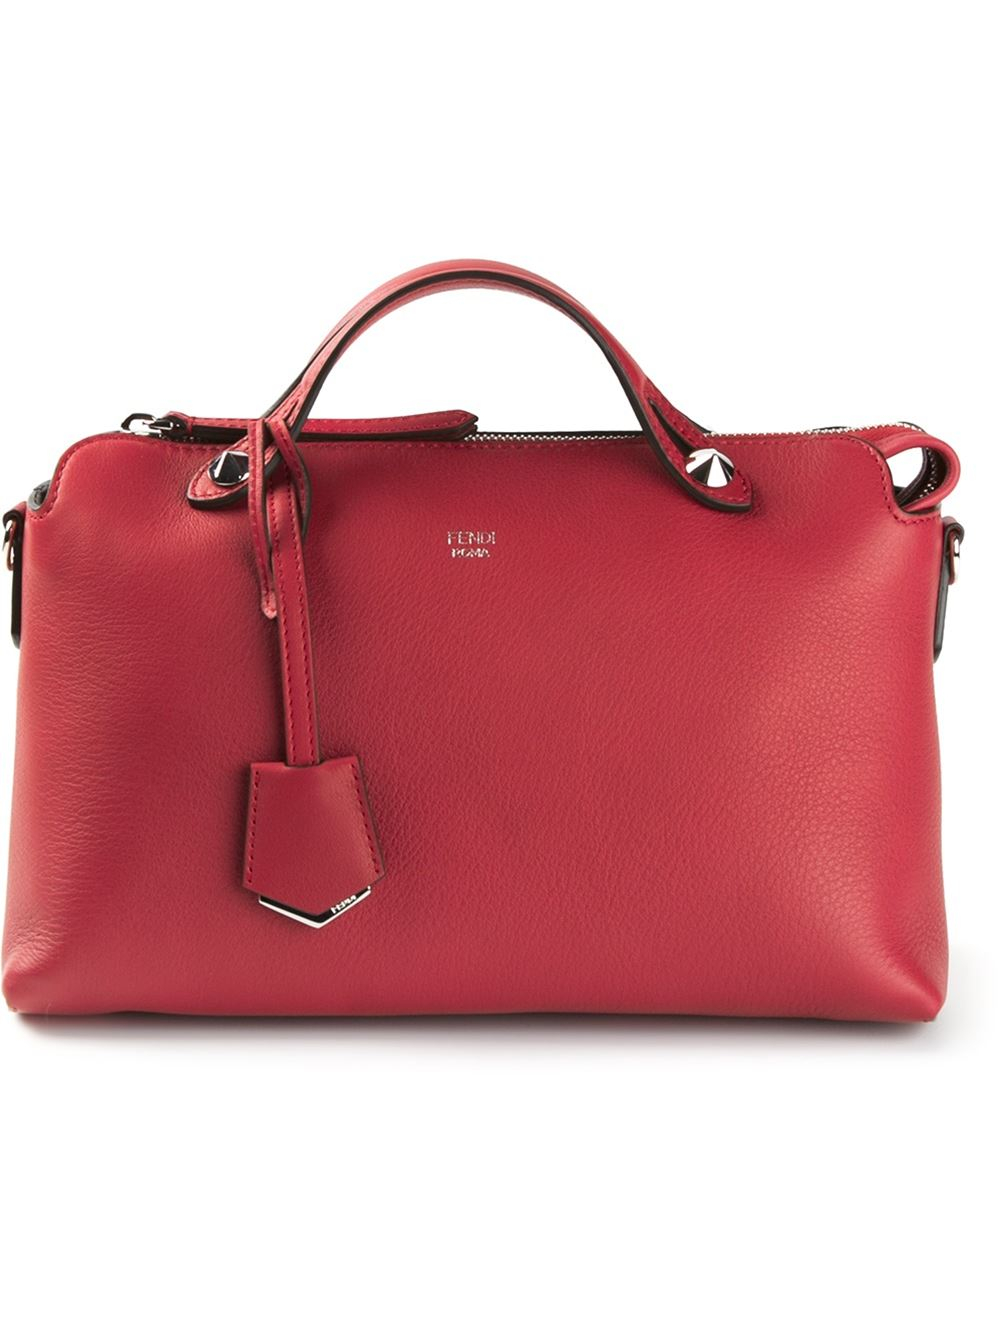 Fendi By The Way Leather Shoulder Bag in Red | Lyst